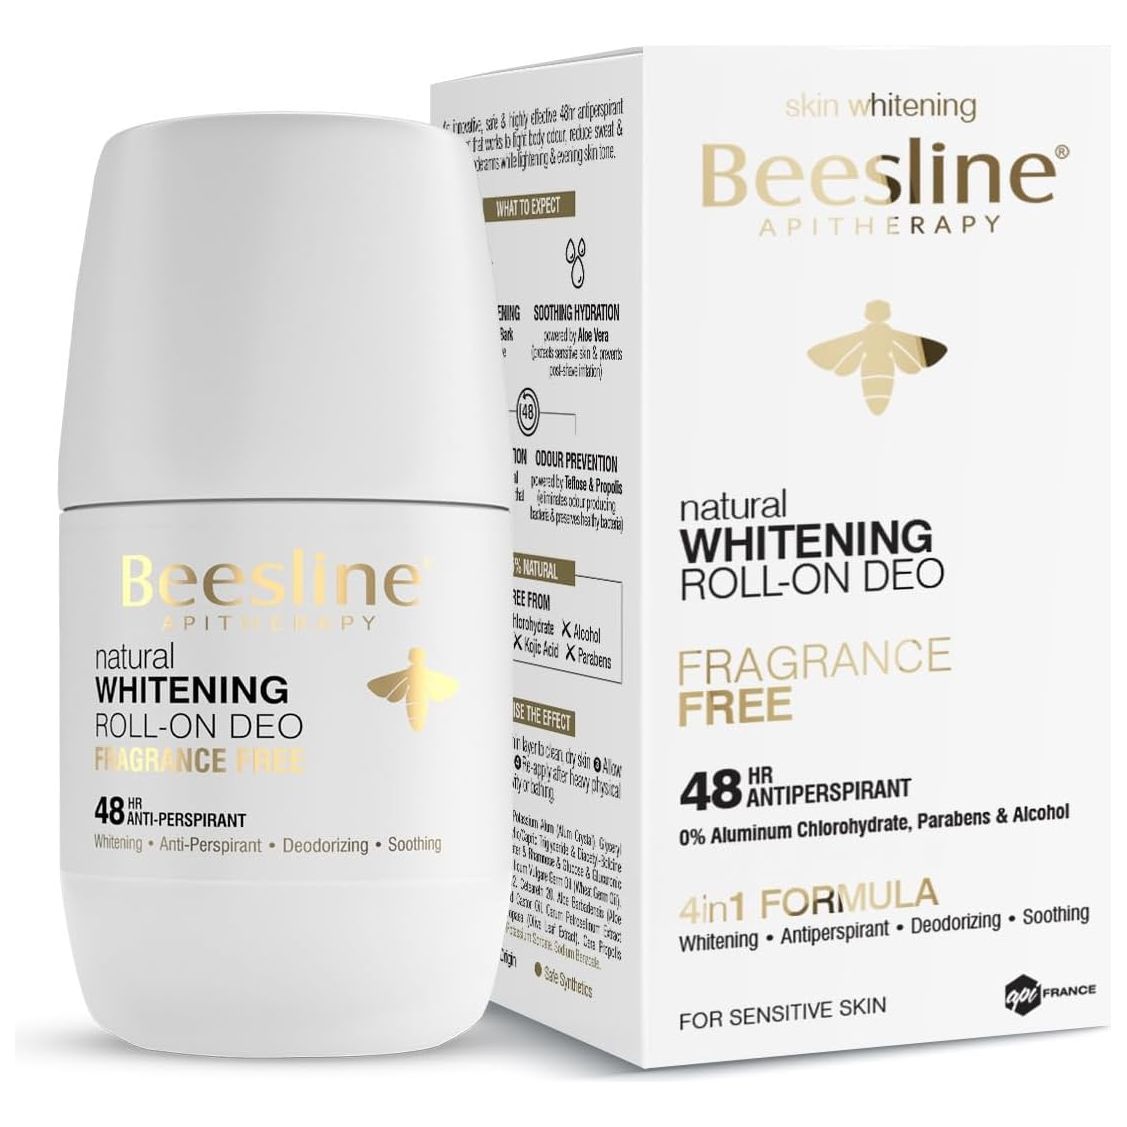 Beesline Natural Whitening Roll On Deodorant Fragrance Free